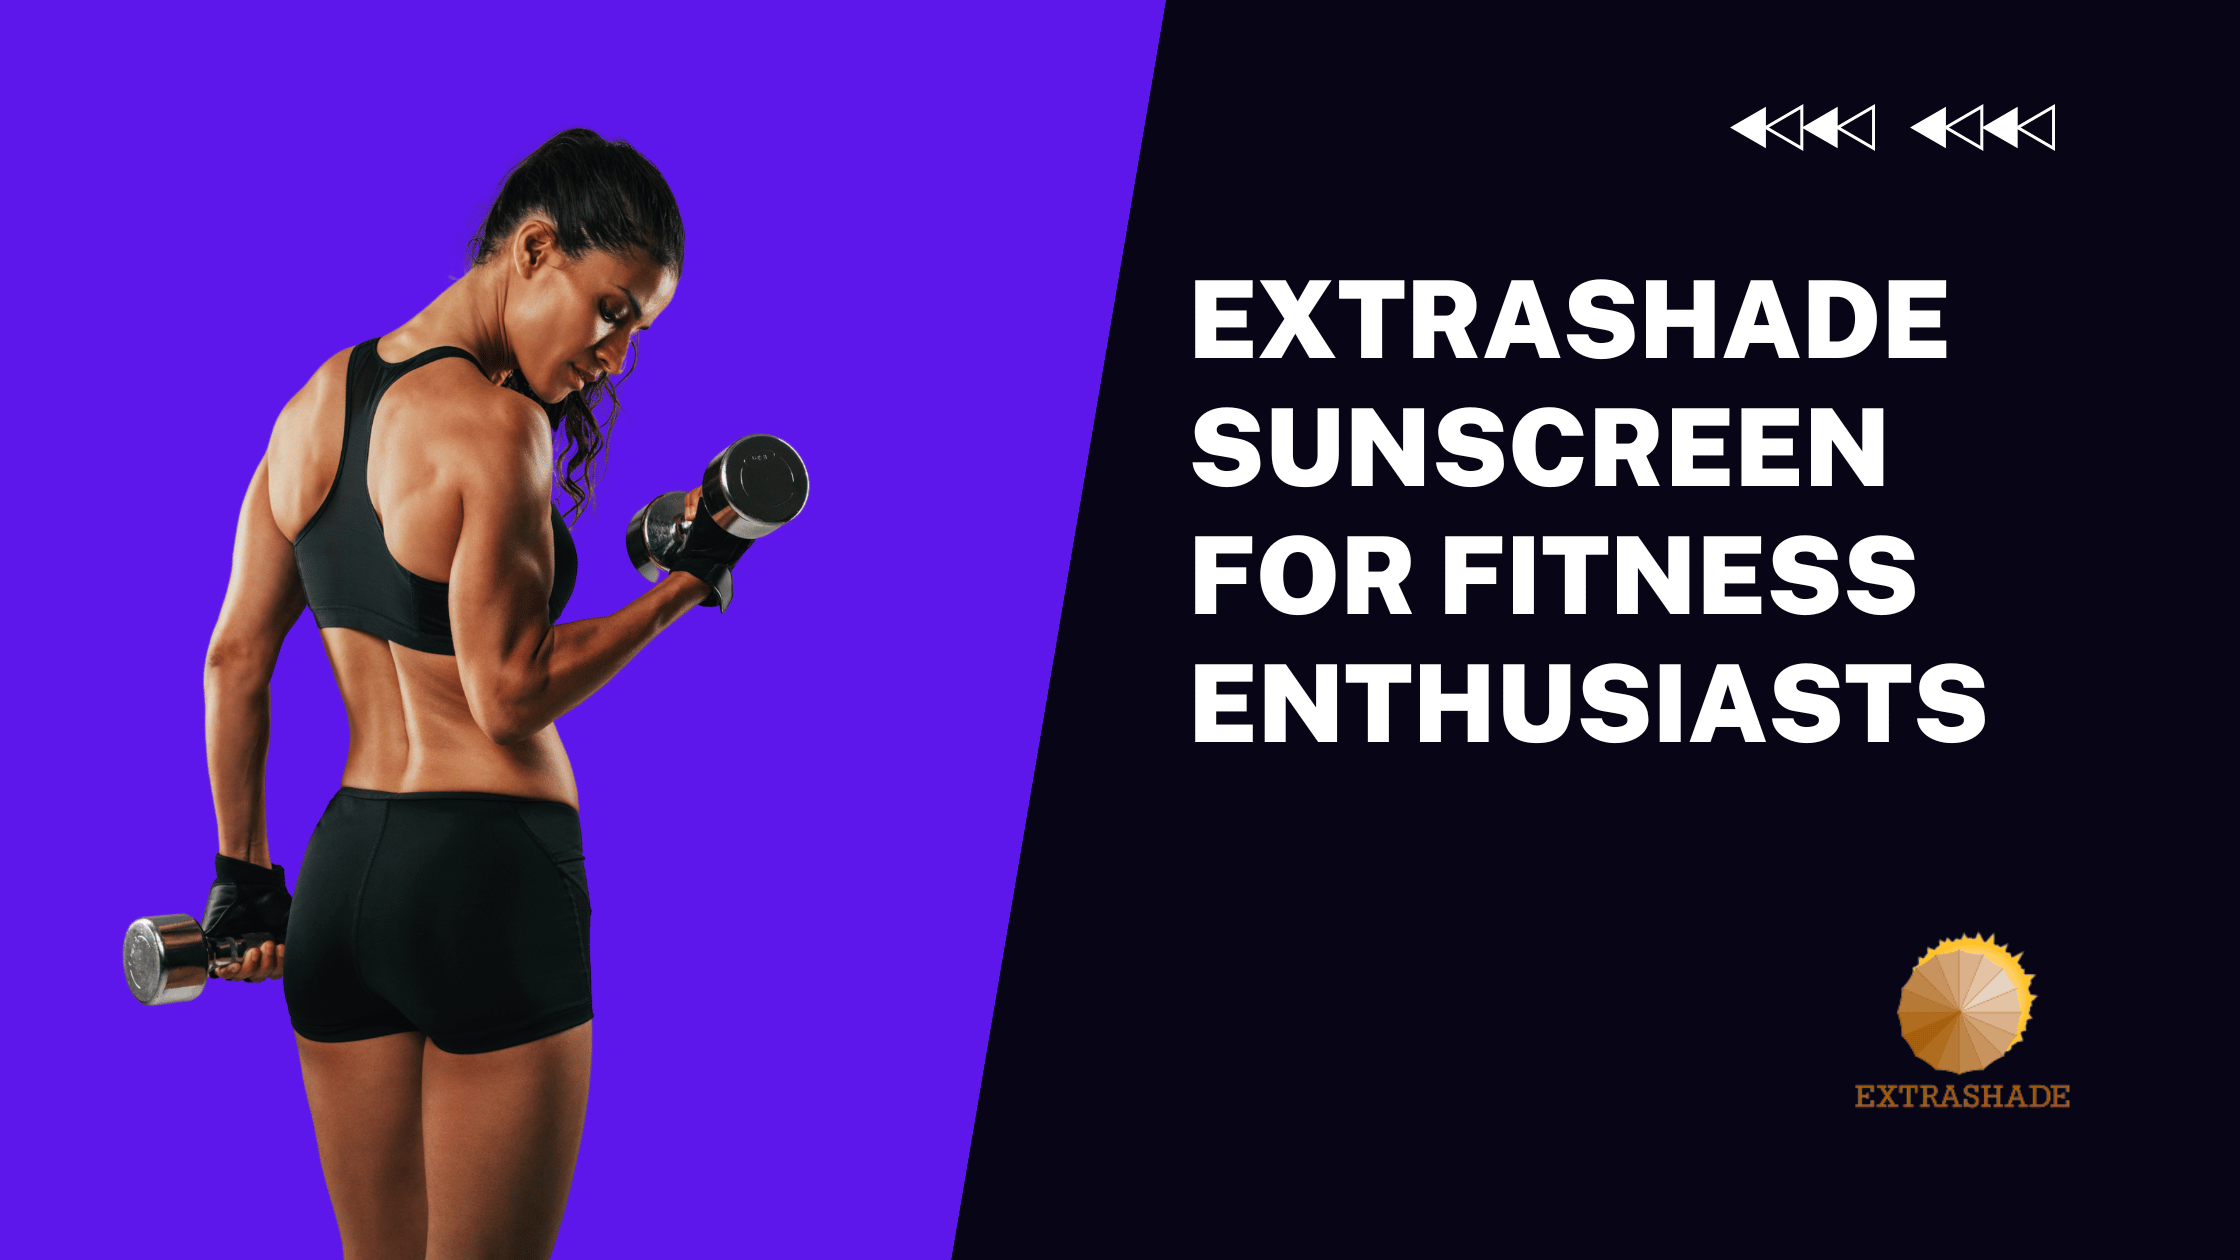 EXTRASHADE Sunscreen for Fitness Enthusiasts